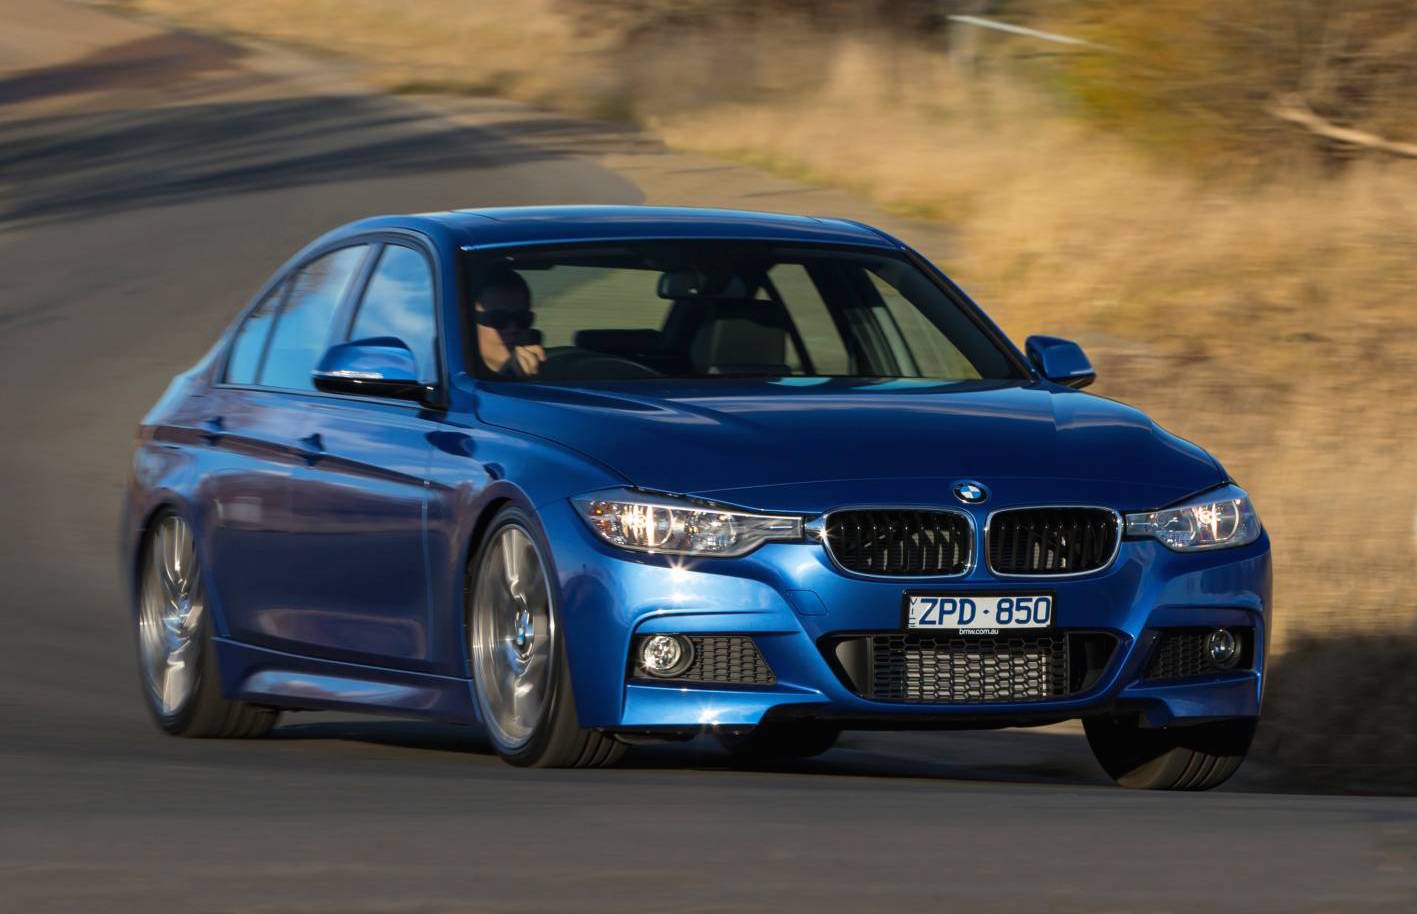 2016 BMW 3 Series LCI to drop 335i, new 340i replacement